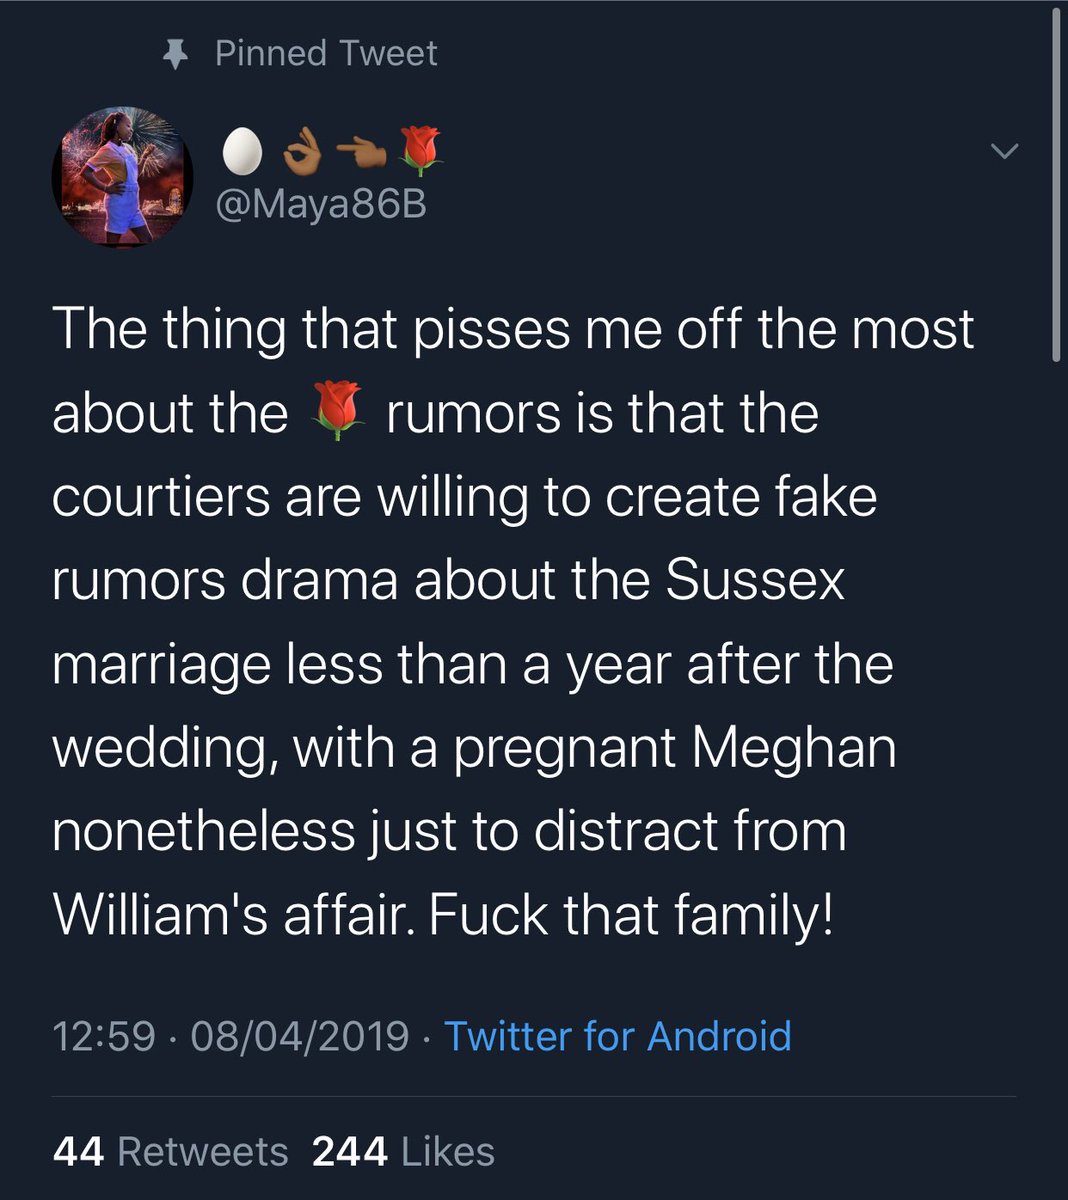 (21/21) the r*se rumours... despite there being absolutely no proof of this and Nicole Cliff admitting on social media that it was a rumour she had MADE UP MM fans are still trying to push that its true. Disregarding that it could destroy families